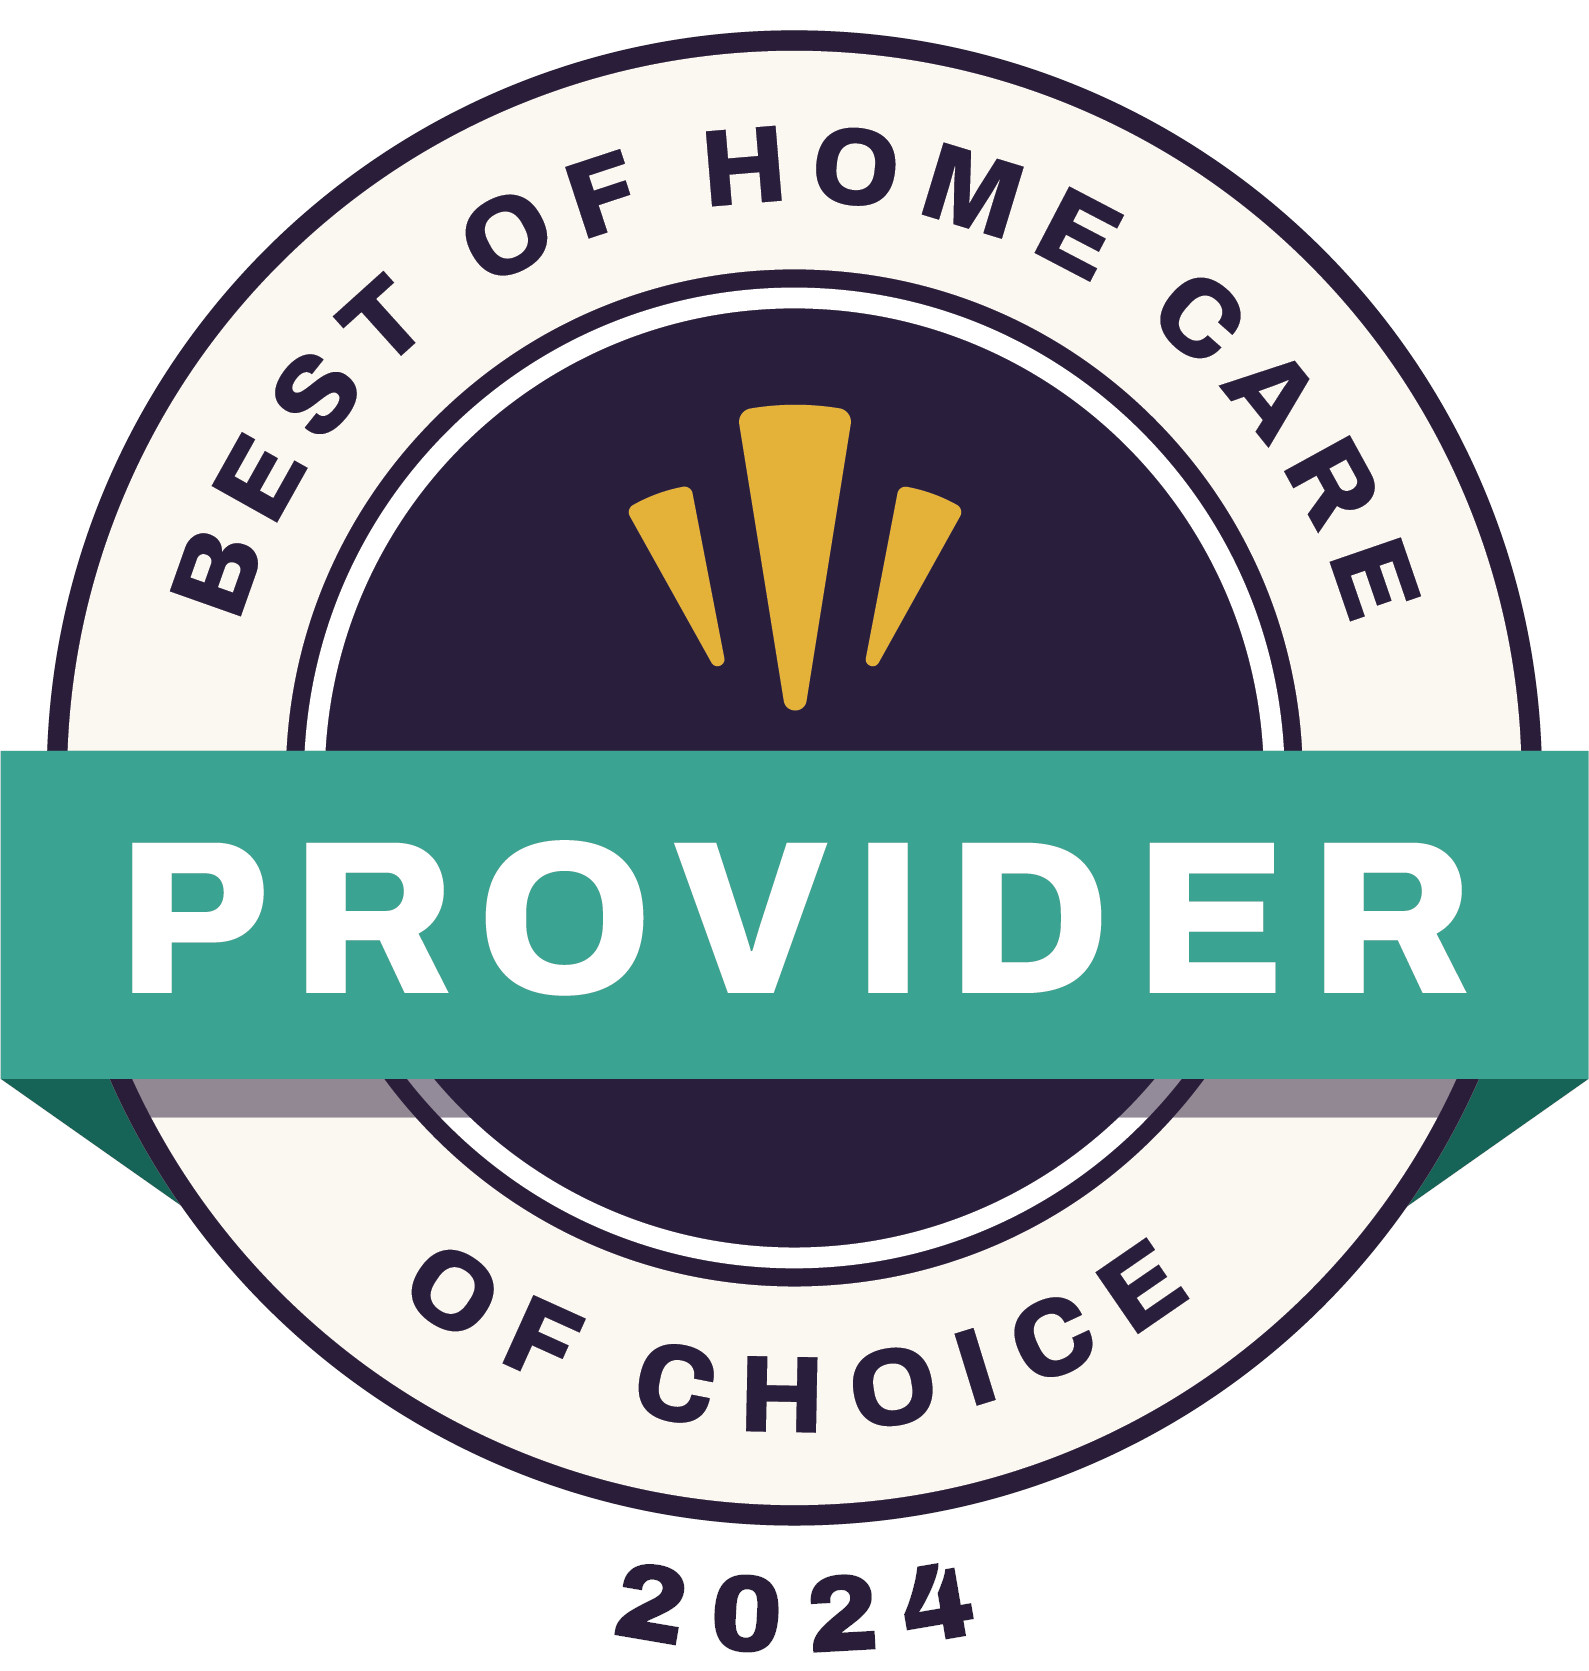 The Best of Home Care – Provider of Choice award signifies high client satisfaction. This award is based on satisfaction ratings gathered from verified clients. To qualify, an agency must outperform other home care agencies in their geographic region in addition to other criteria.